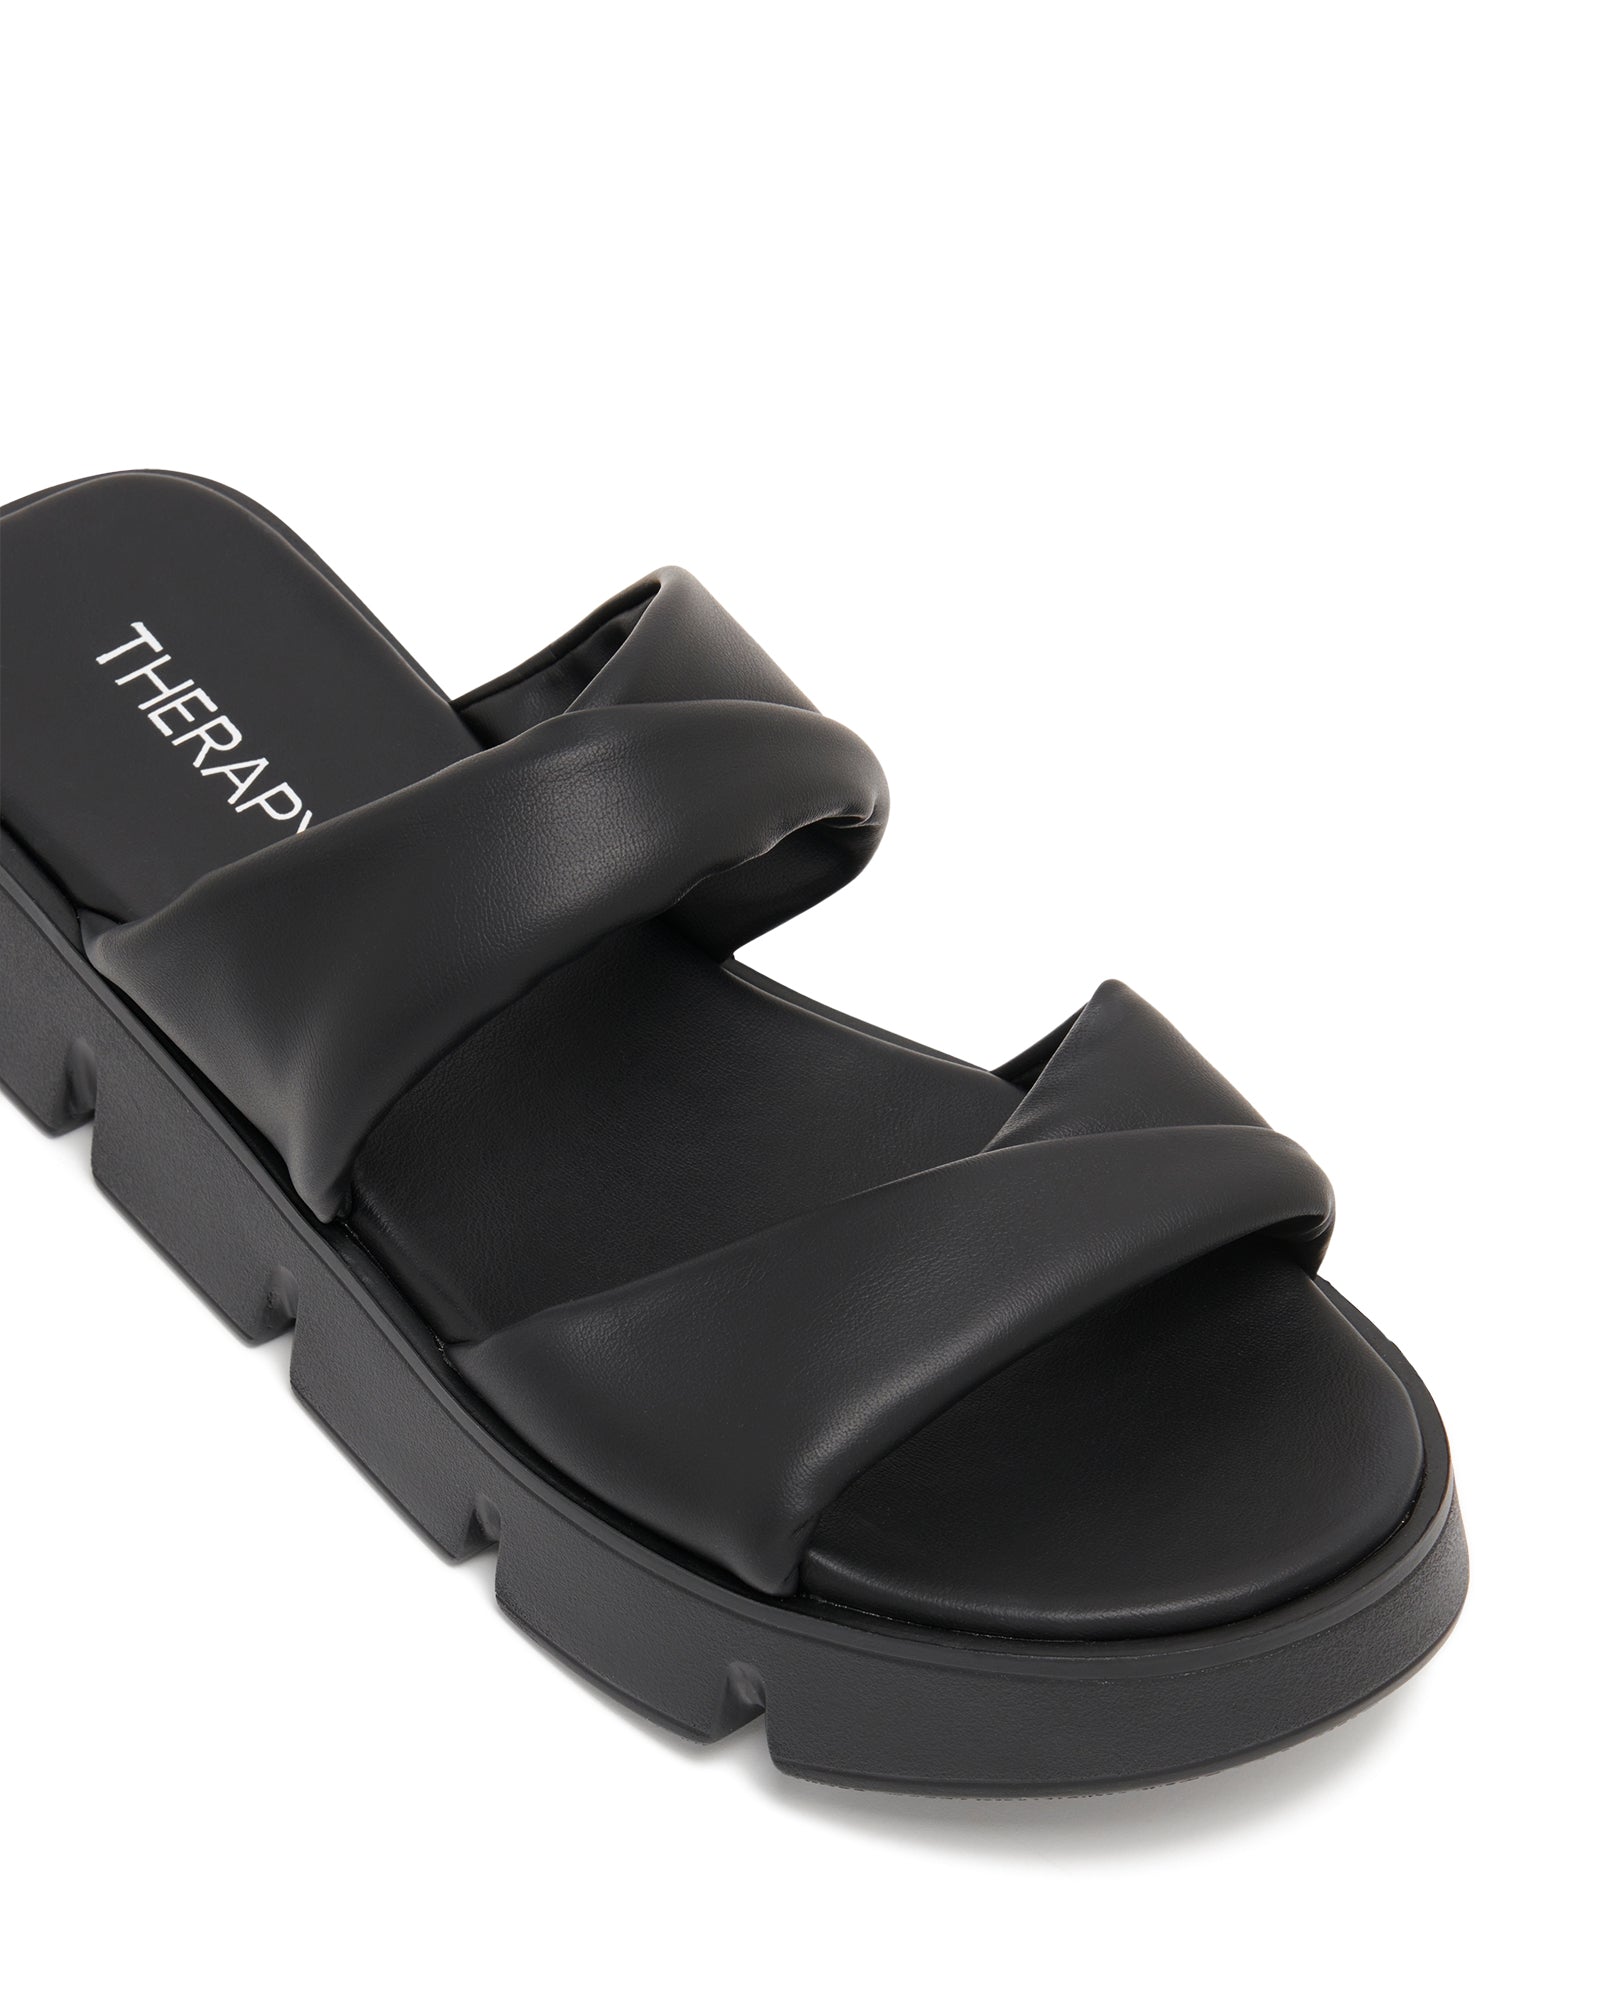 Therapy Shoes Maxie Black Smooth | Women's Sandals | Slides | Flatform